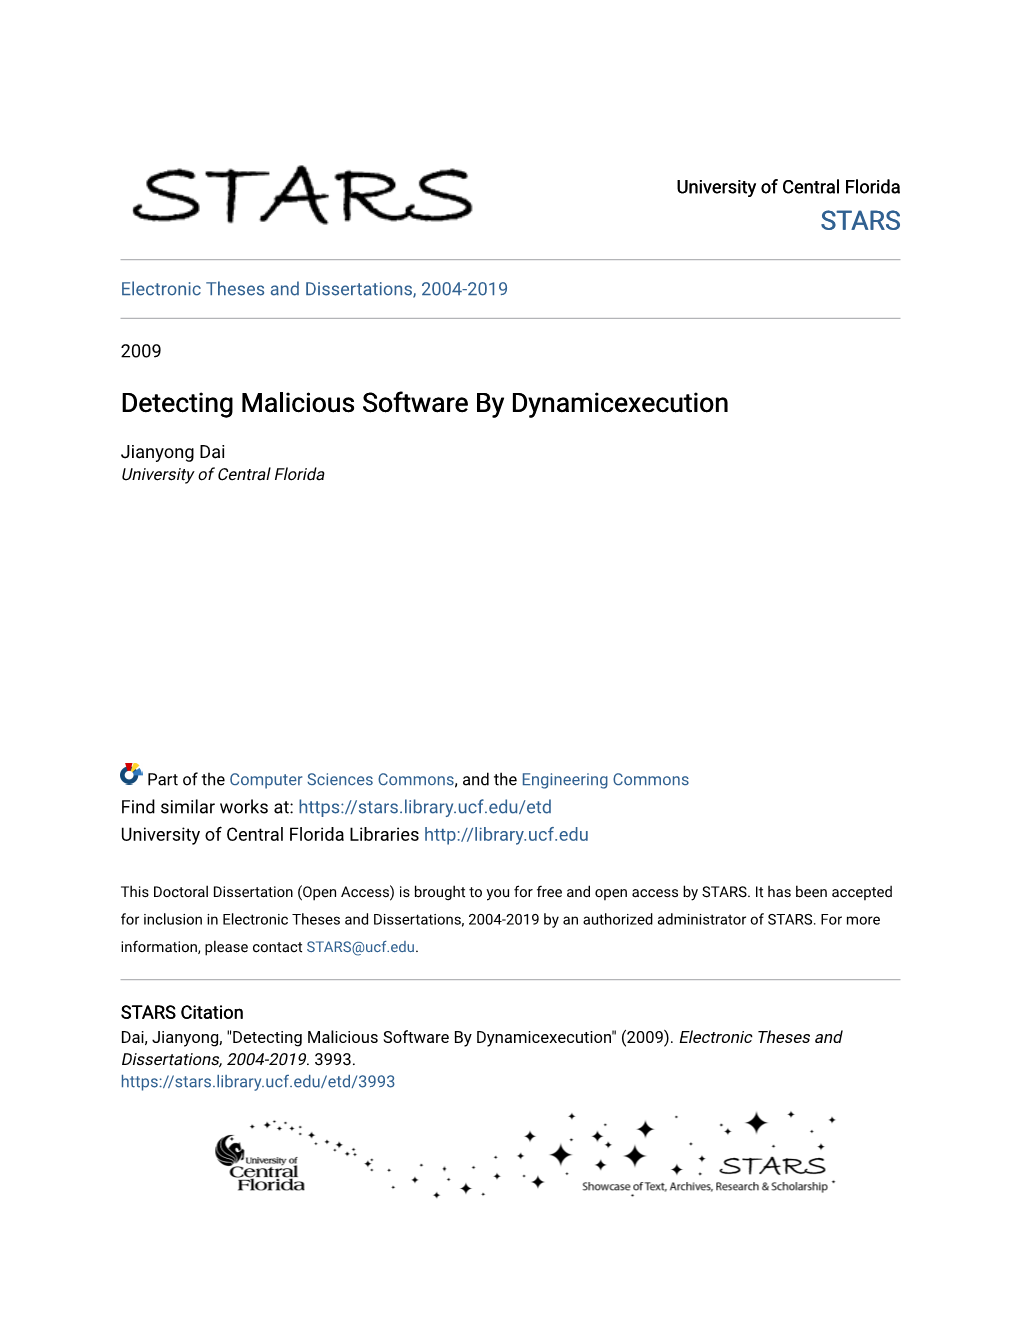 Detecting Malicious Software by Dynamicexecution